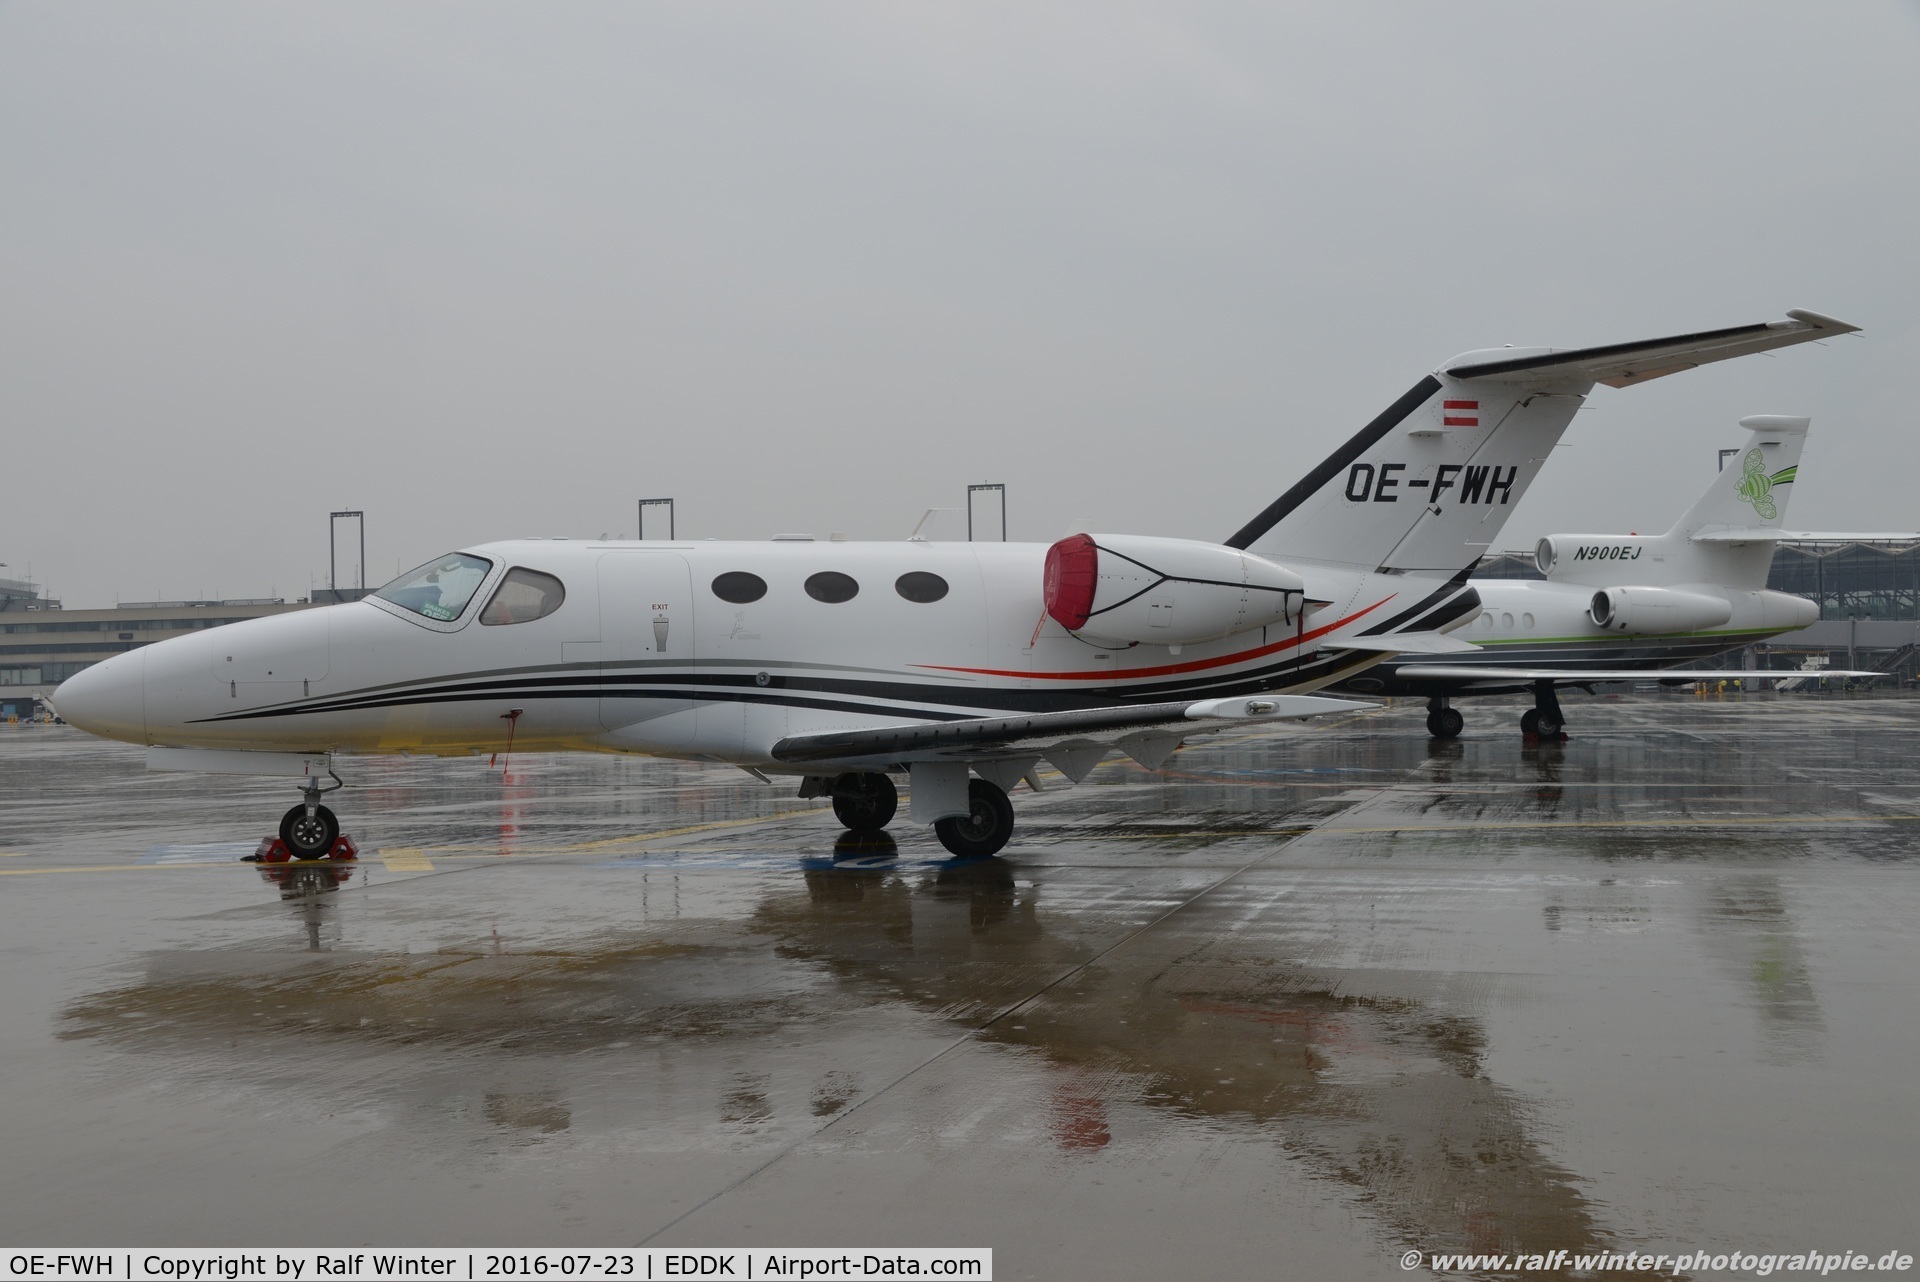 OE-FWH, 2008 Cessna 510 Citation Mustang Citation Mustang C/N 510-0104, Cessna 510 Citation Mustang - VIF VIF Luffahrtgesellschaft mbH - 510-0104 - OE-FWH - 23.07.2016 - CGN